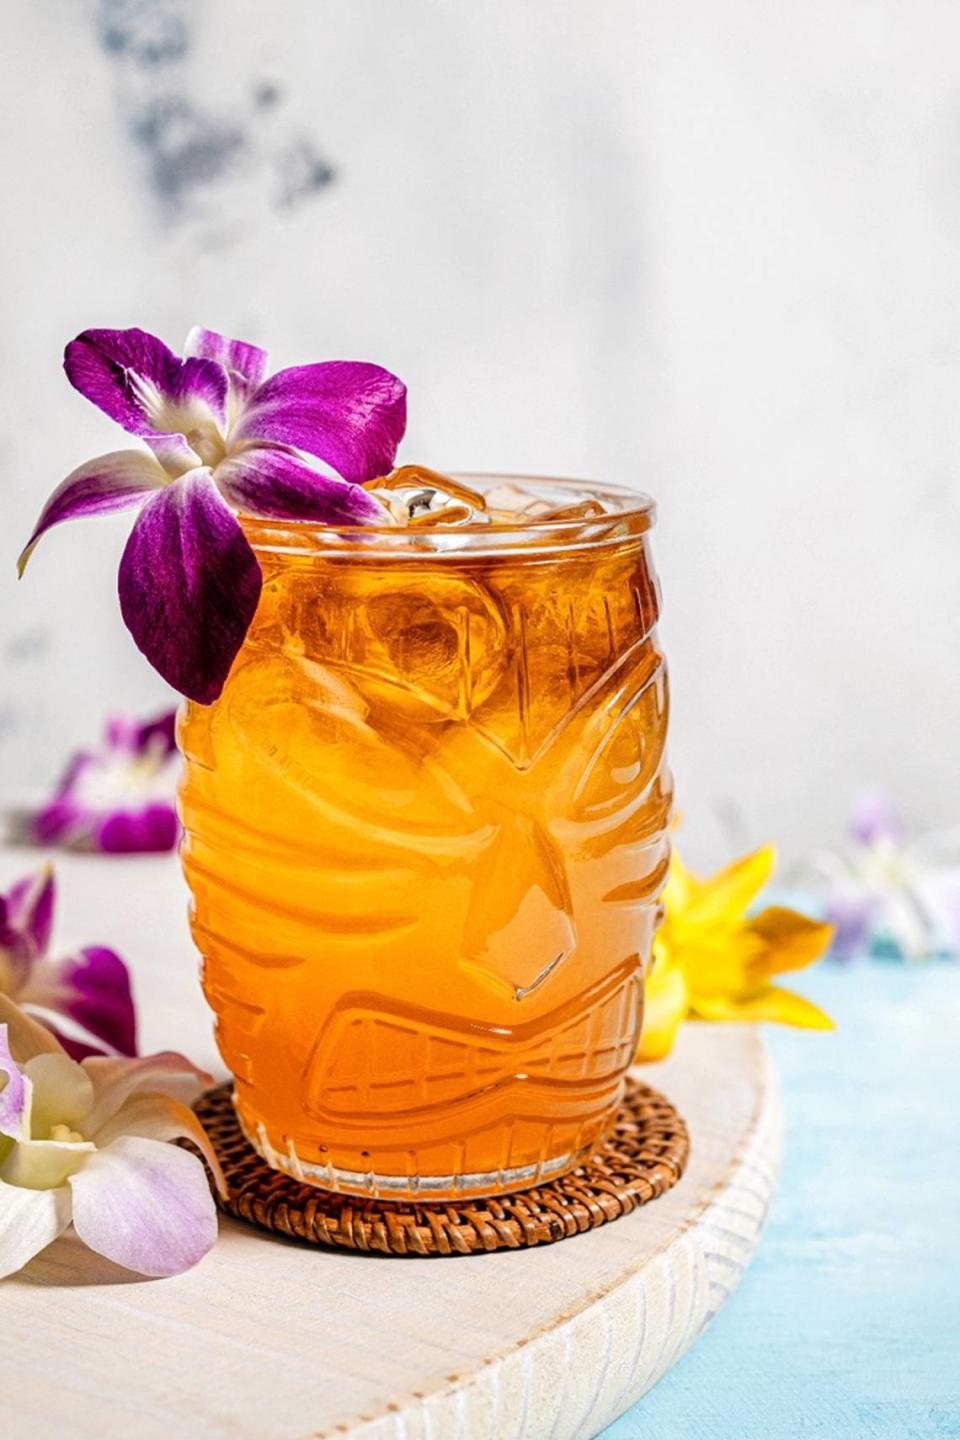 A Tommy Bahama Restaurant and Marlin Bar will be joining the lineup of dining places coming to Center Point at Waterside, Lakewood Ranch. Shown above is the Tommy Bahama mai tai.